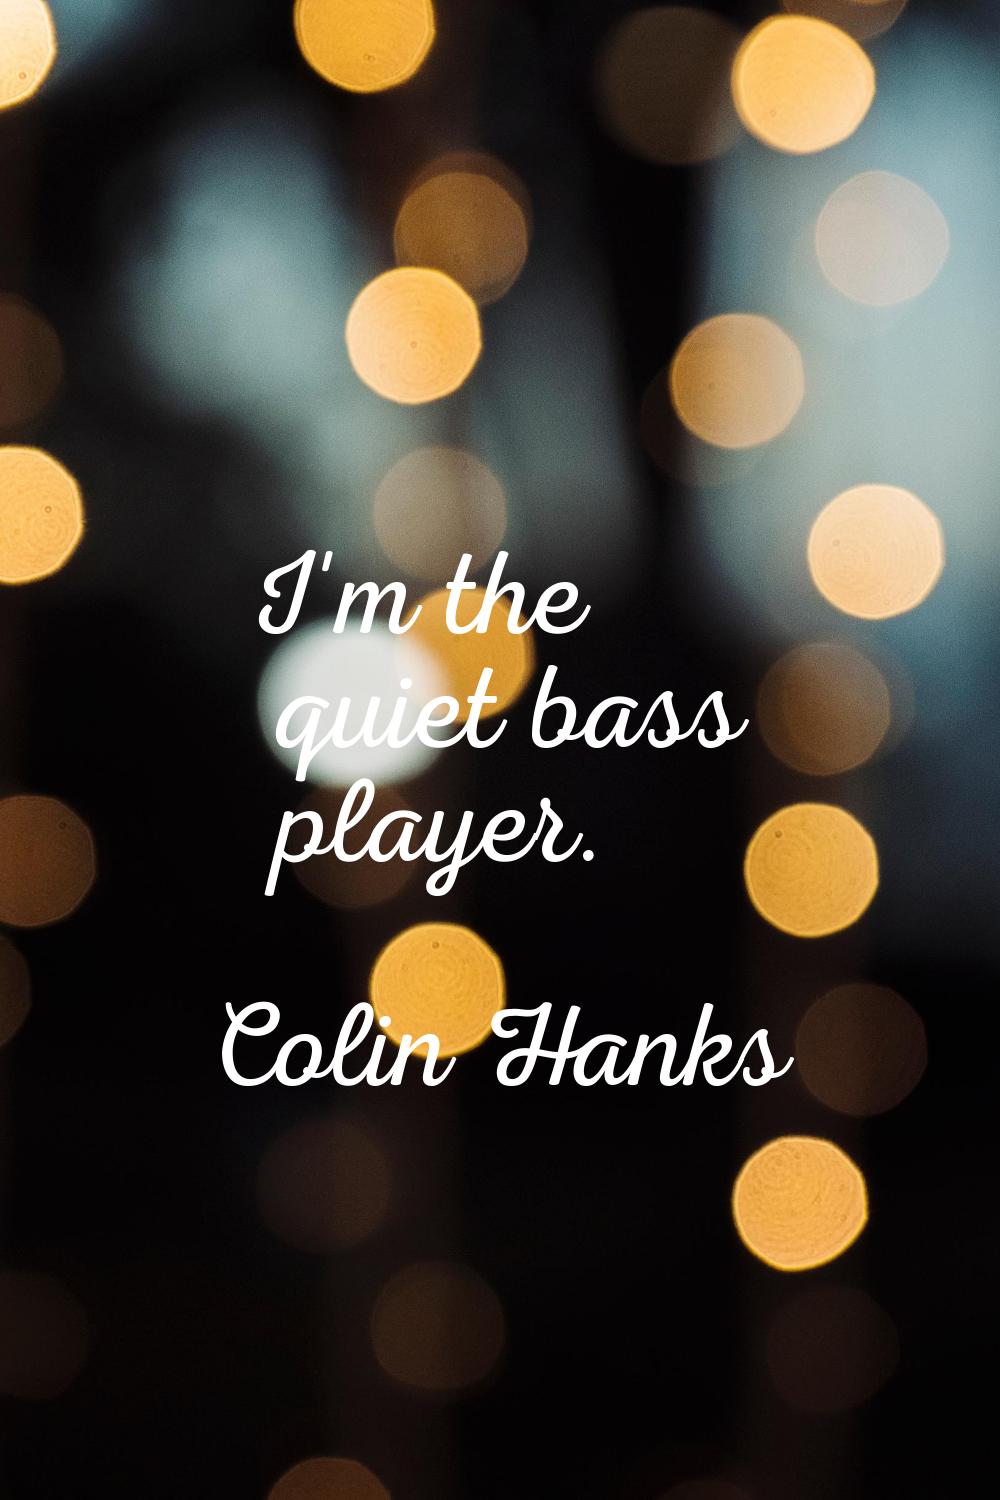 I'm the quiet bass player.